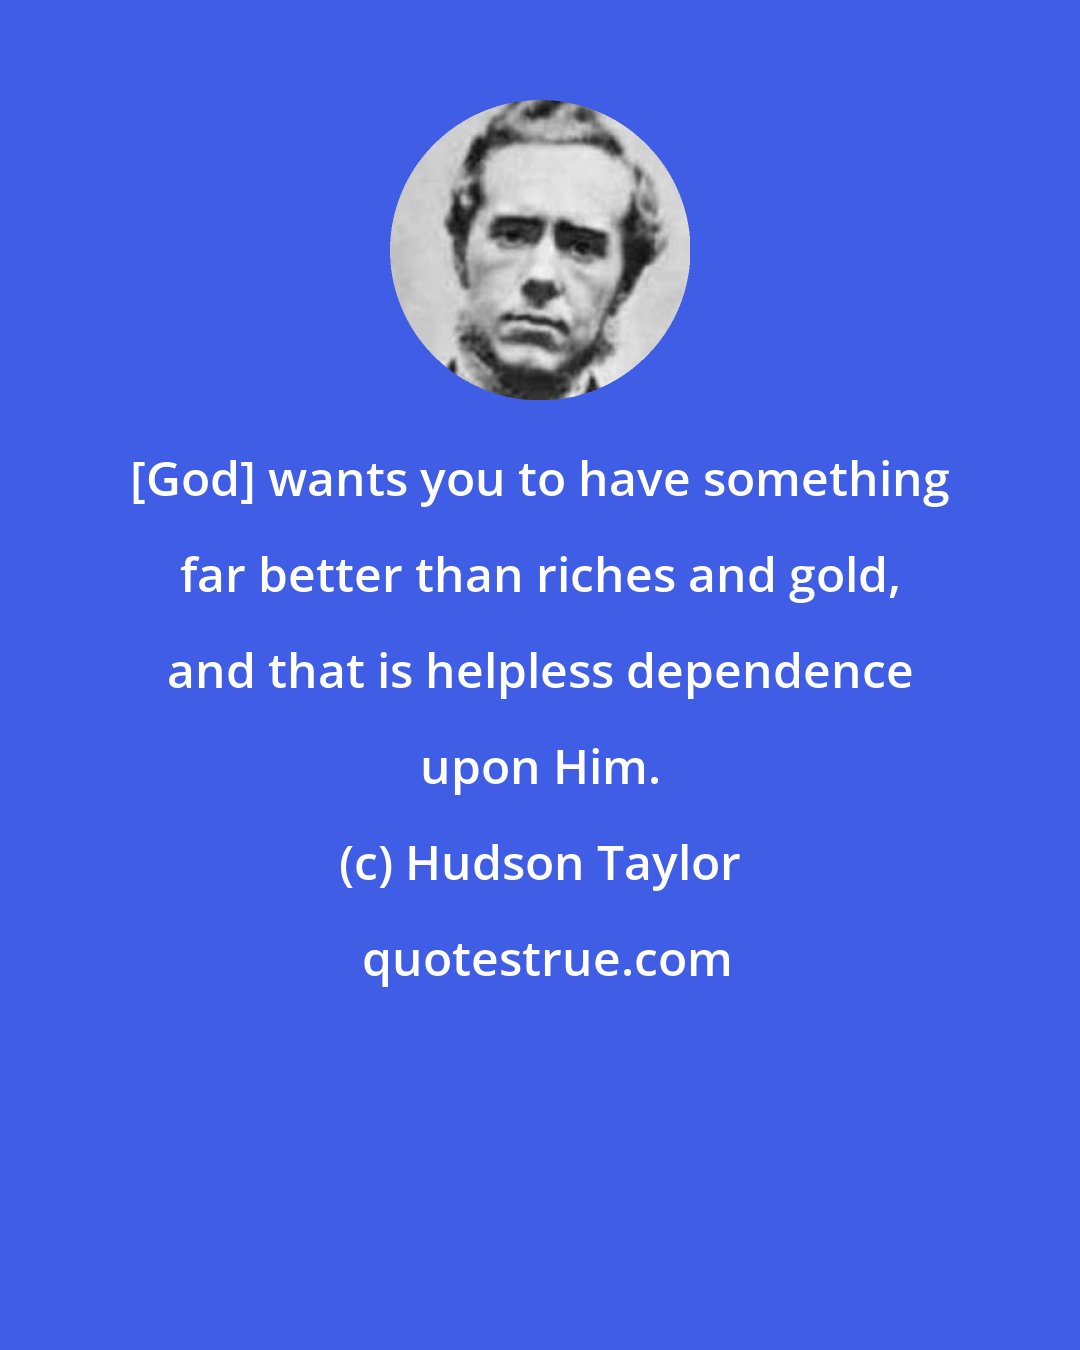 Hudson Taylor: [God] wants you to have something far better than riches and gold, and that is helpless dependence upon Him.